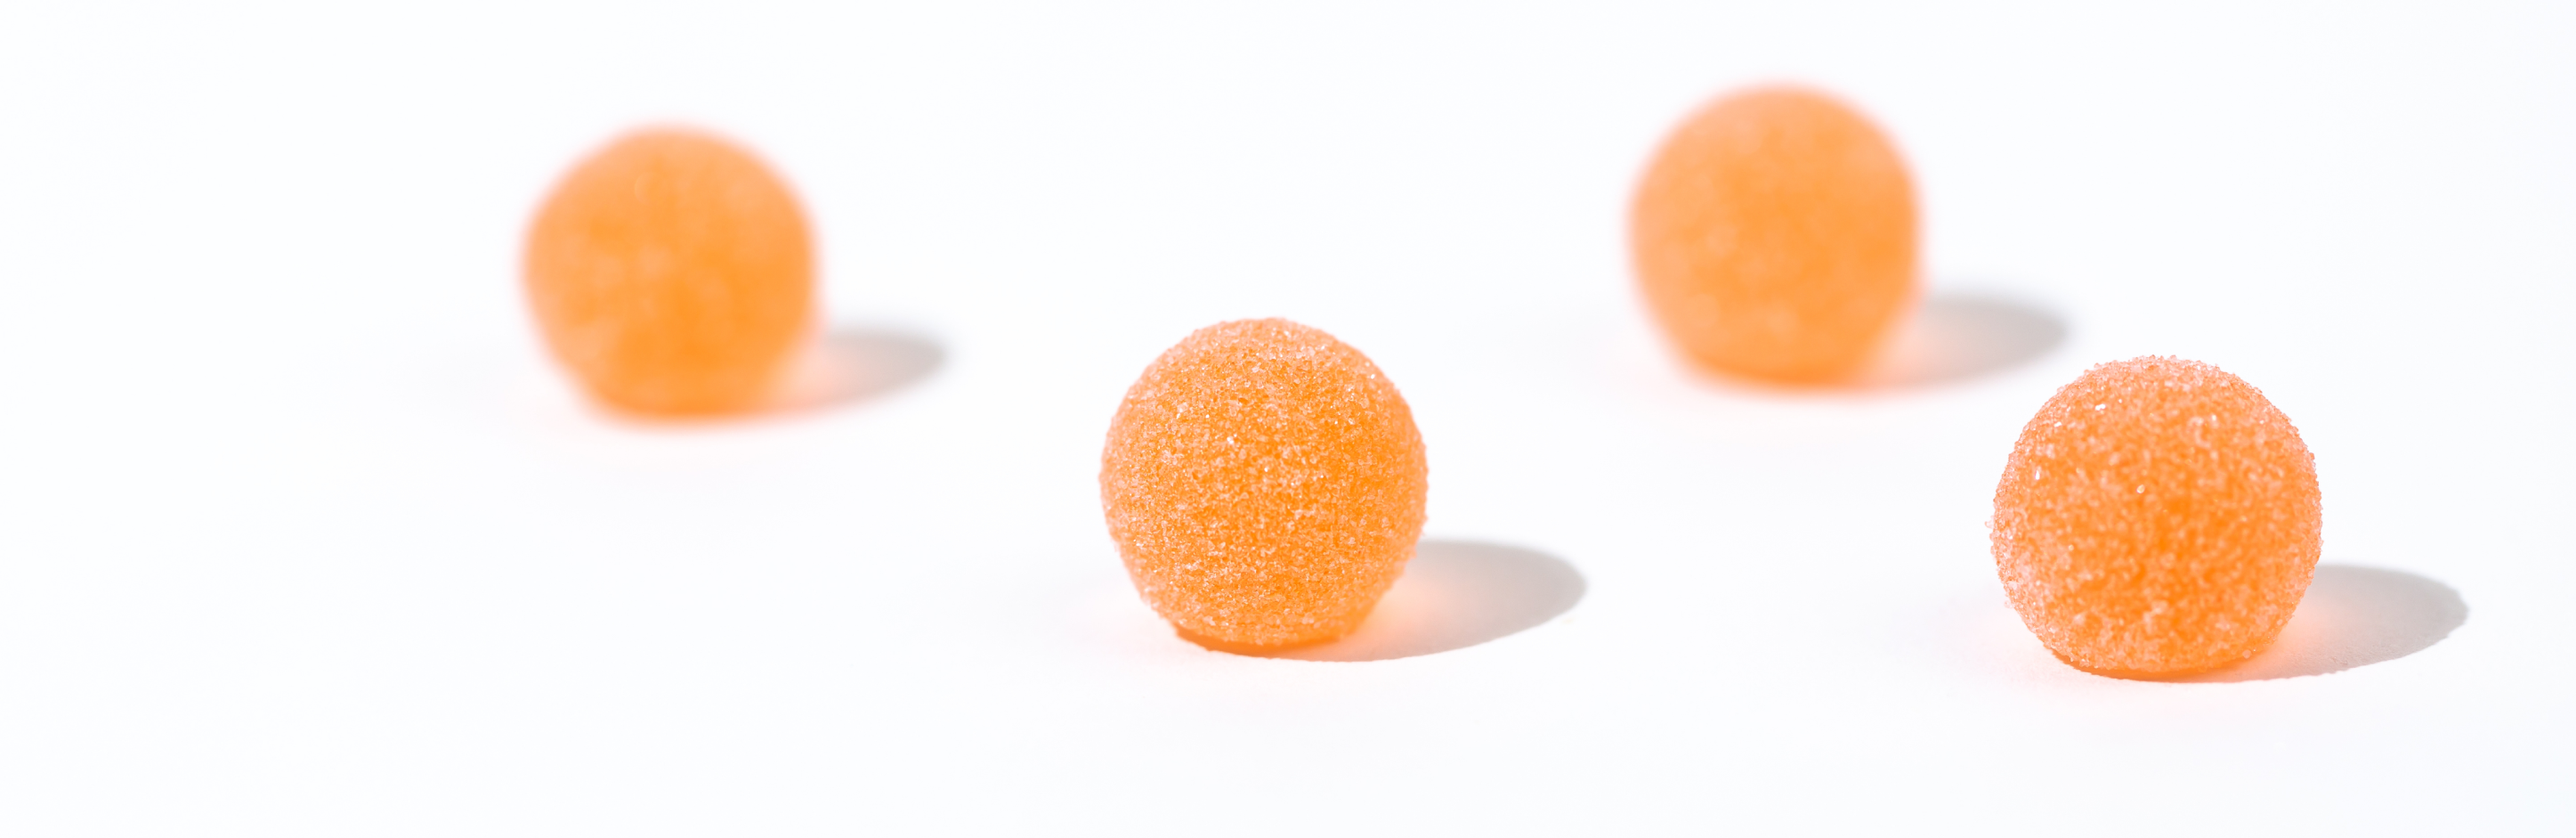 Grön Introduces CBC-infused Tangelo Pearls to Cannabis Market